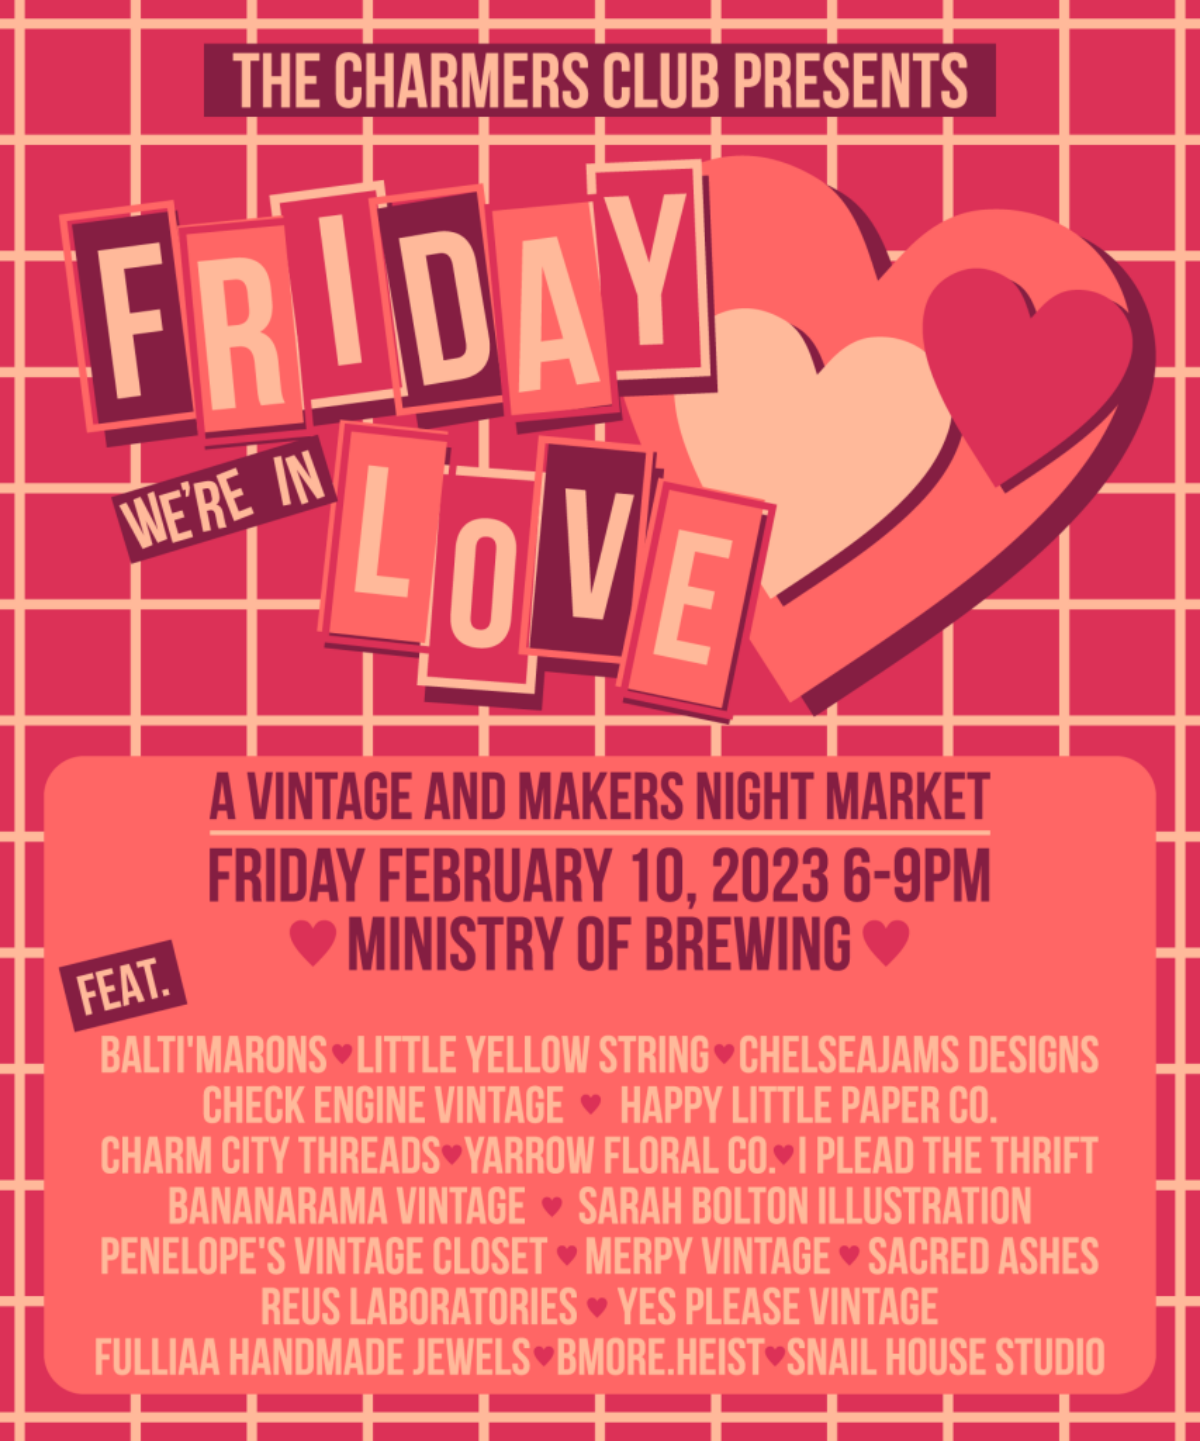 Friday, We're in Love! A Vintage & Makers Market